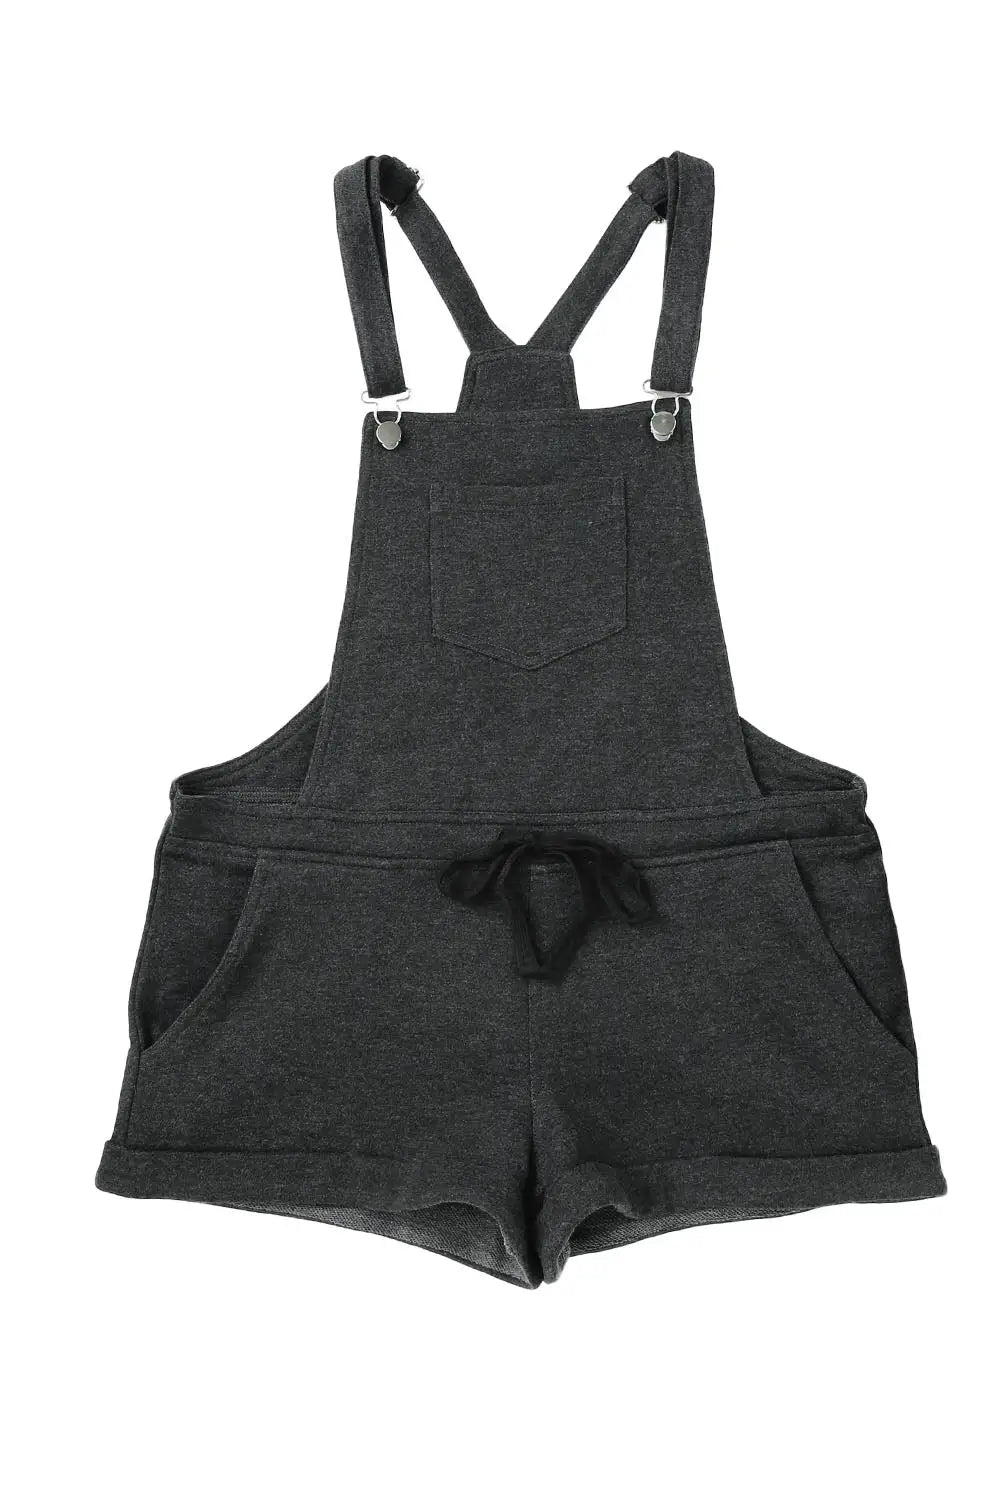 Gray vintage washed drawstring short overalls - jumpsuits & rompers